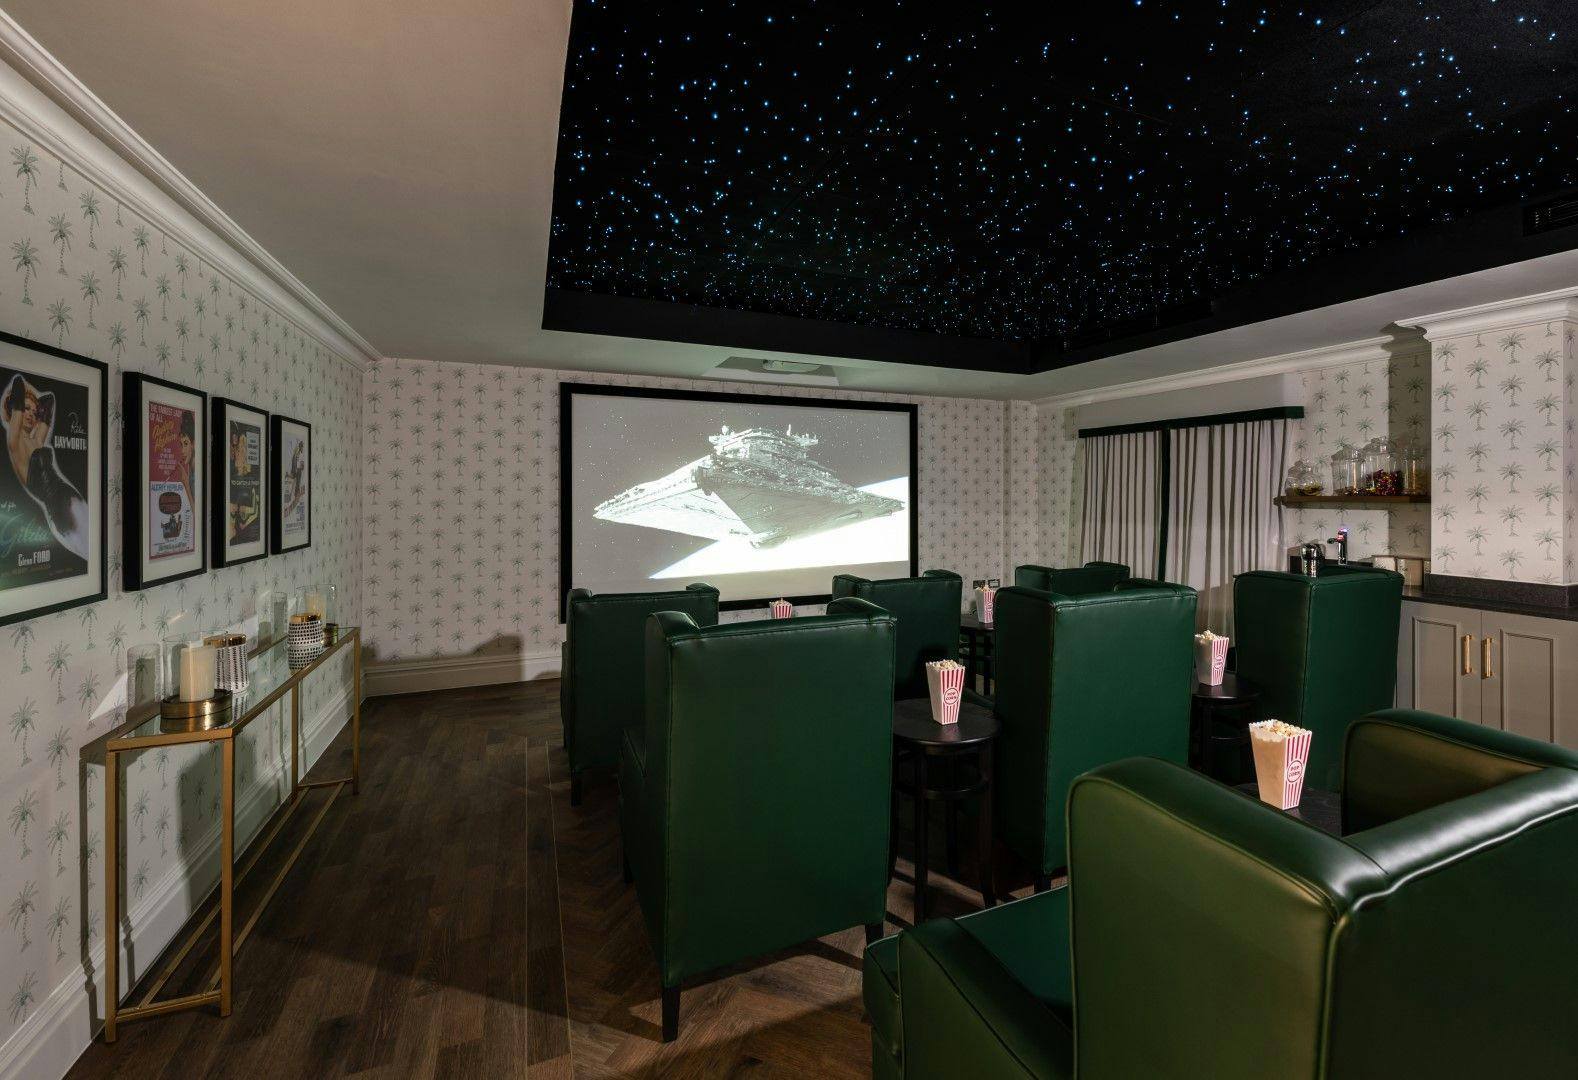 Cinema at Hutton View Care Home in Brentwood, Essex